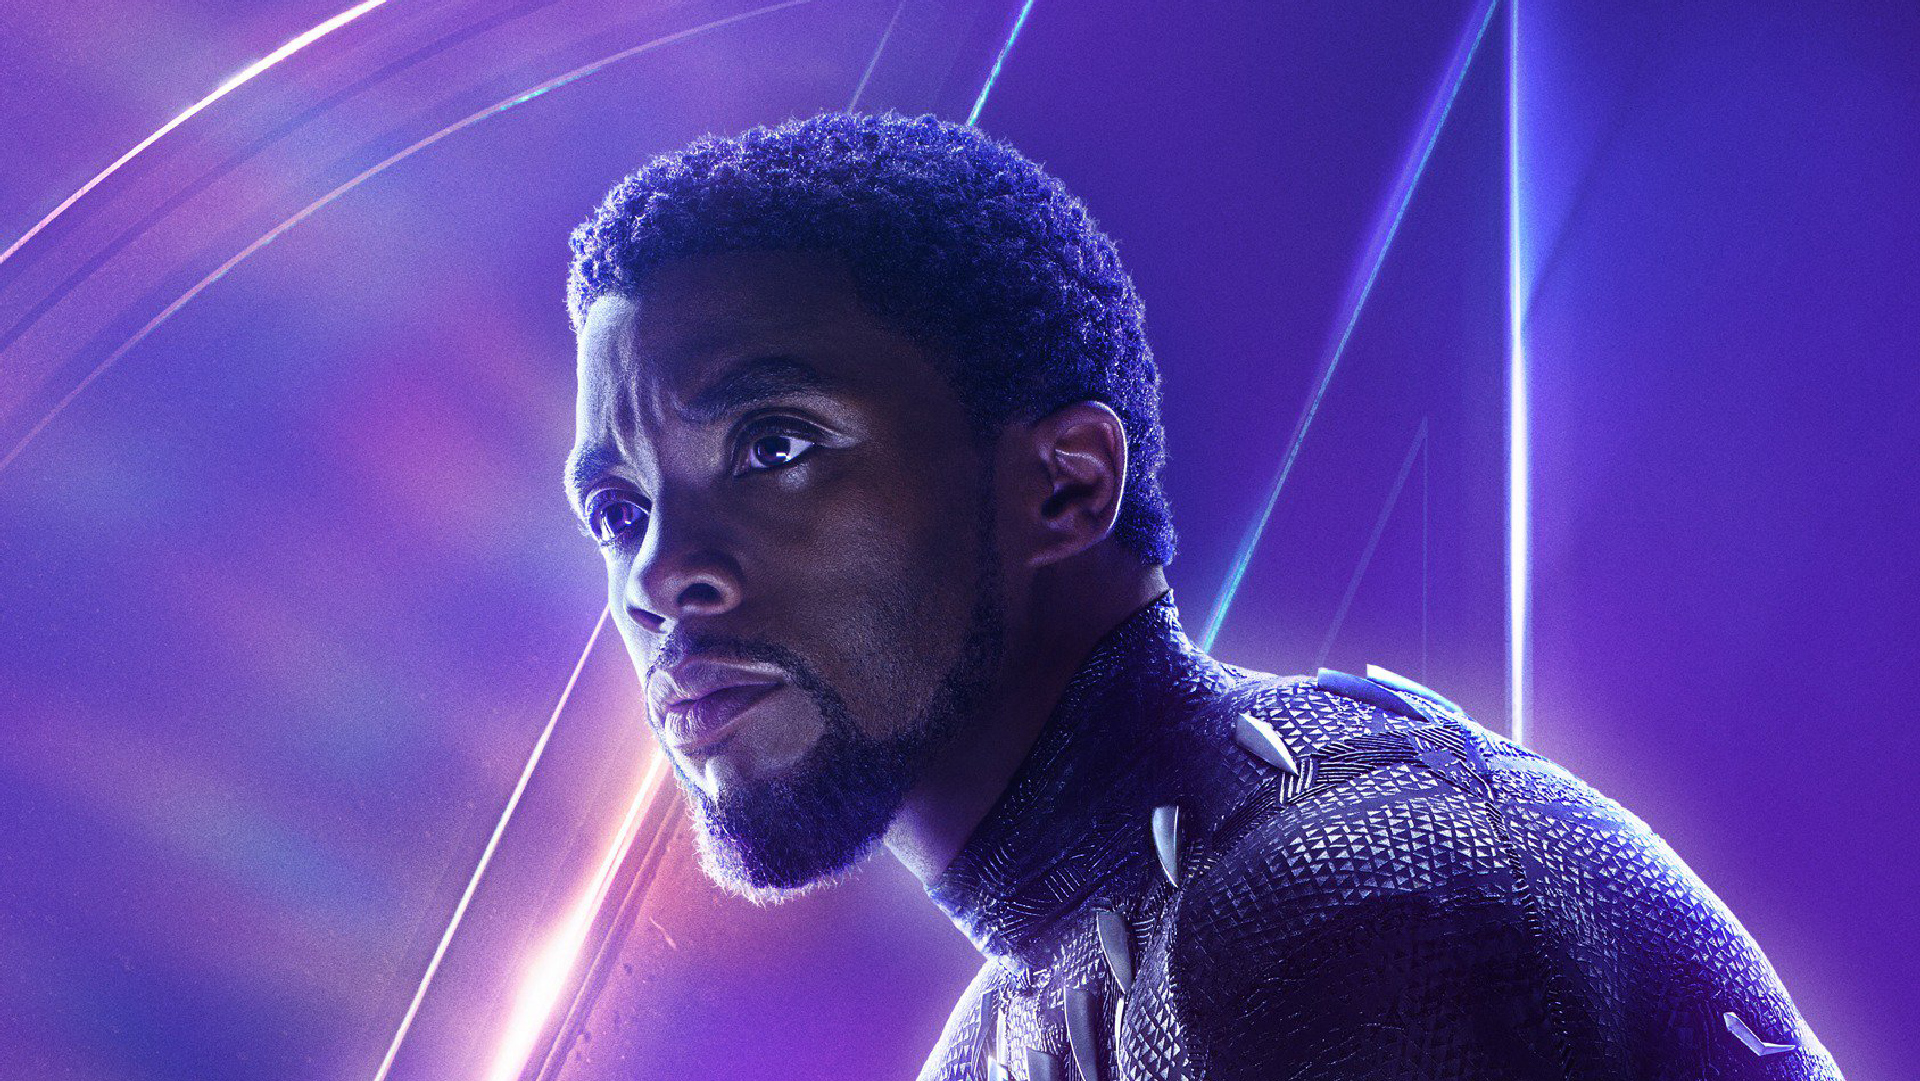 black-panther-in-avengers-infinity-war-new-poster-hd-movies-4k